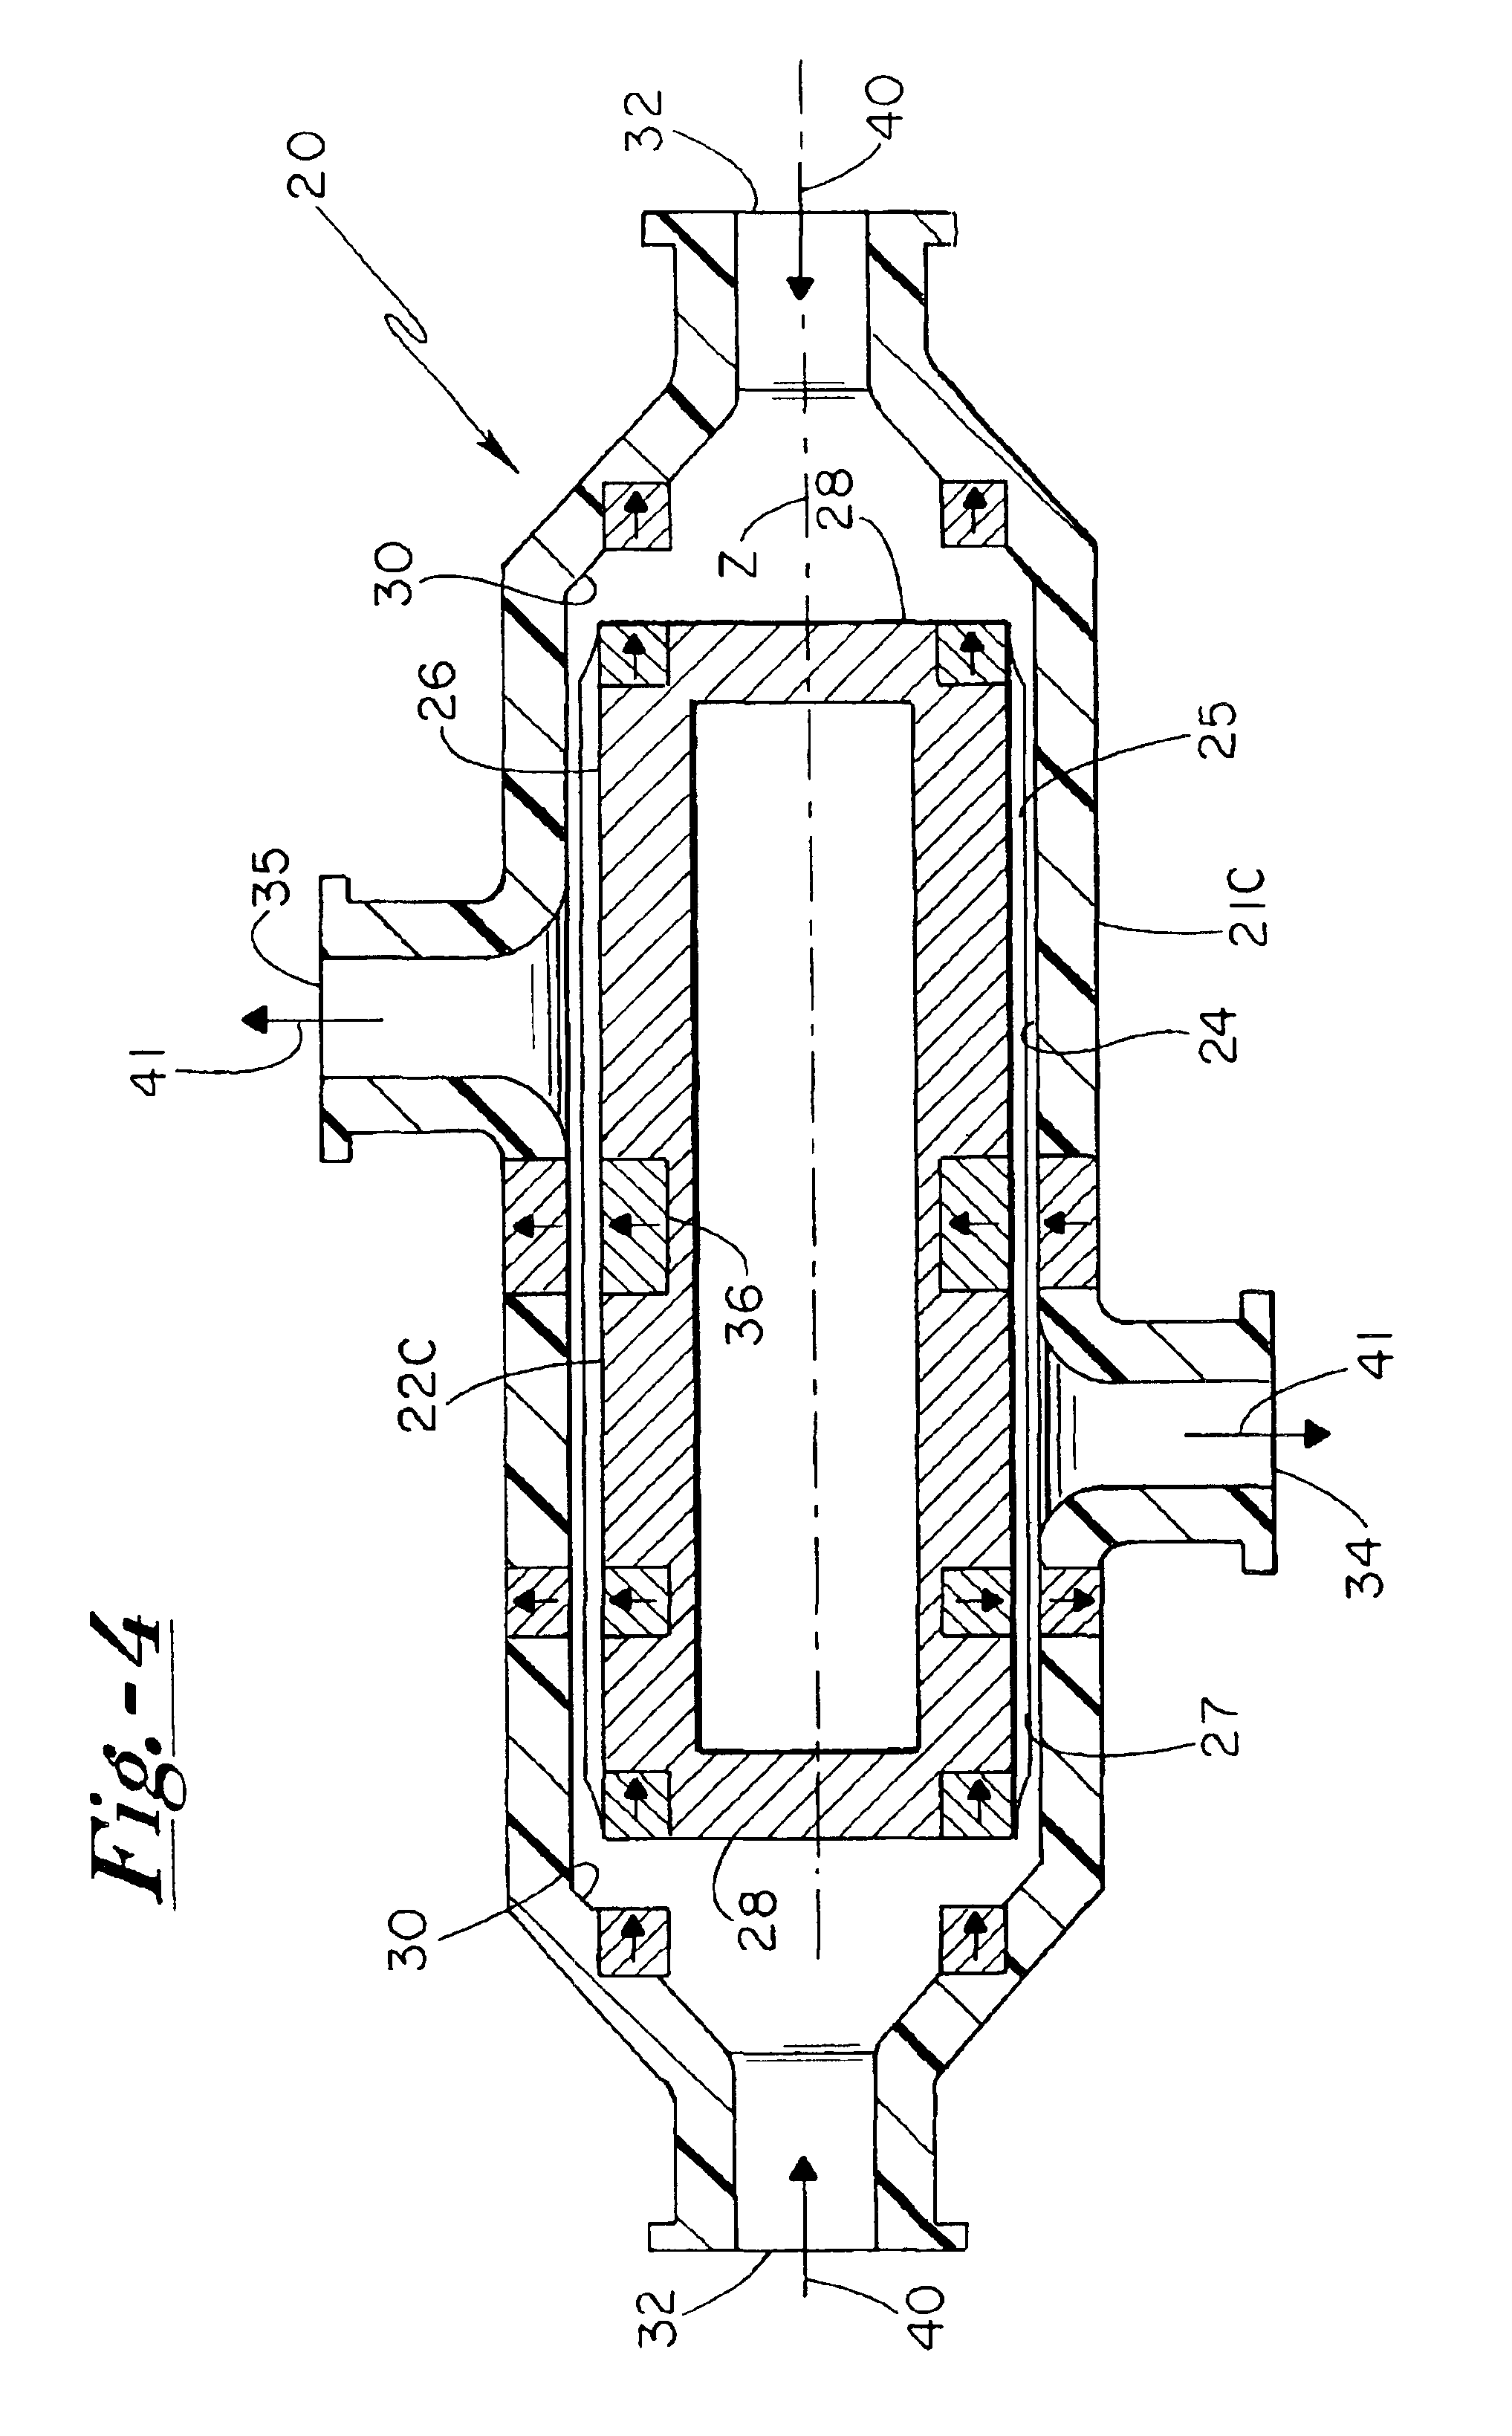 System for passive and stable suspension of a rotor in rotor/stator assemblies